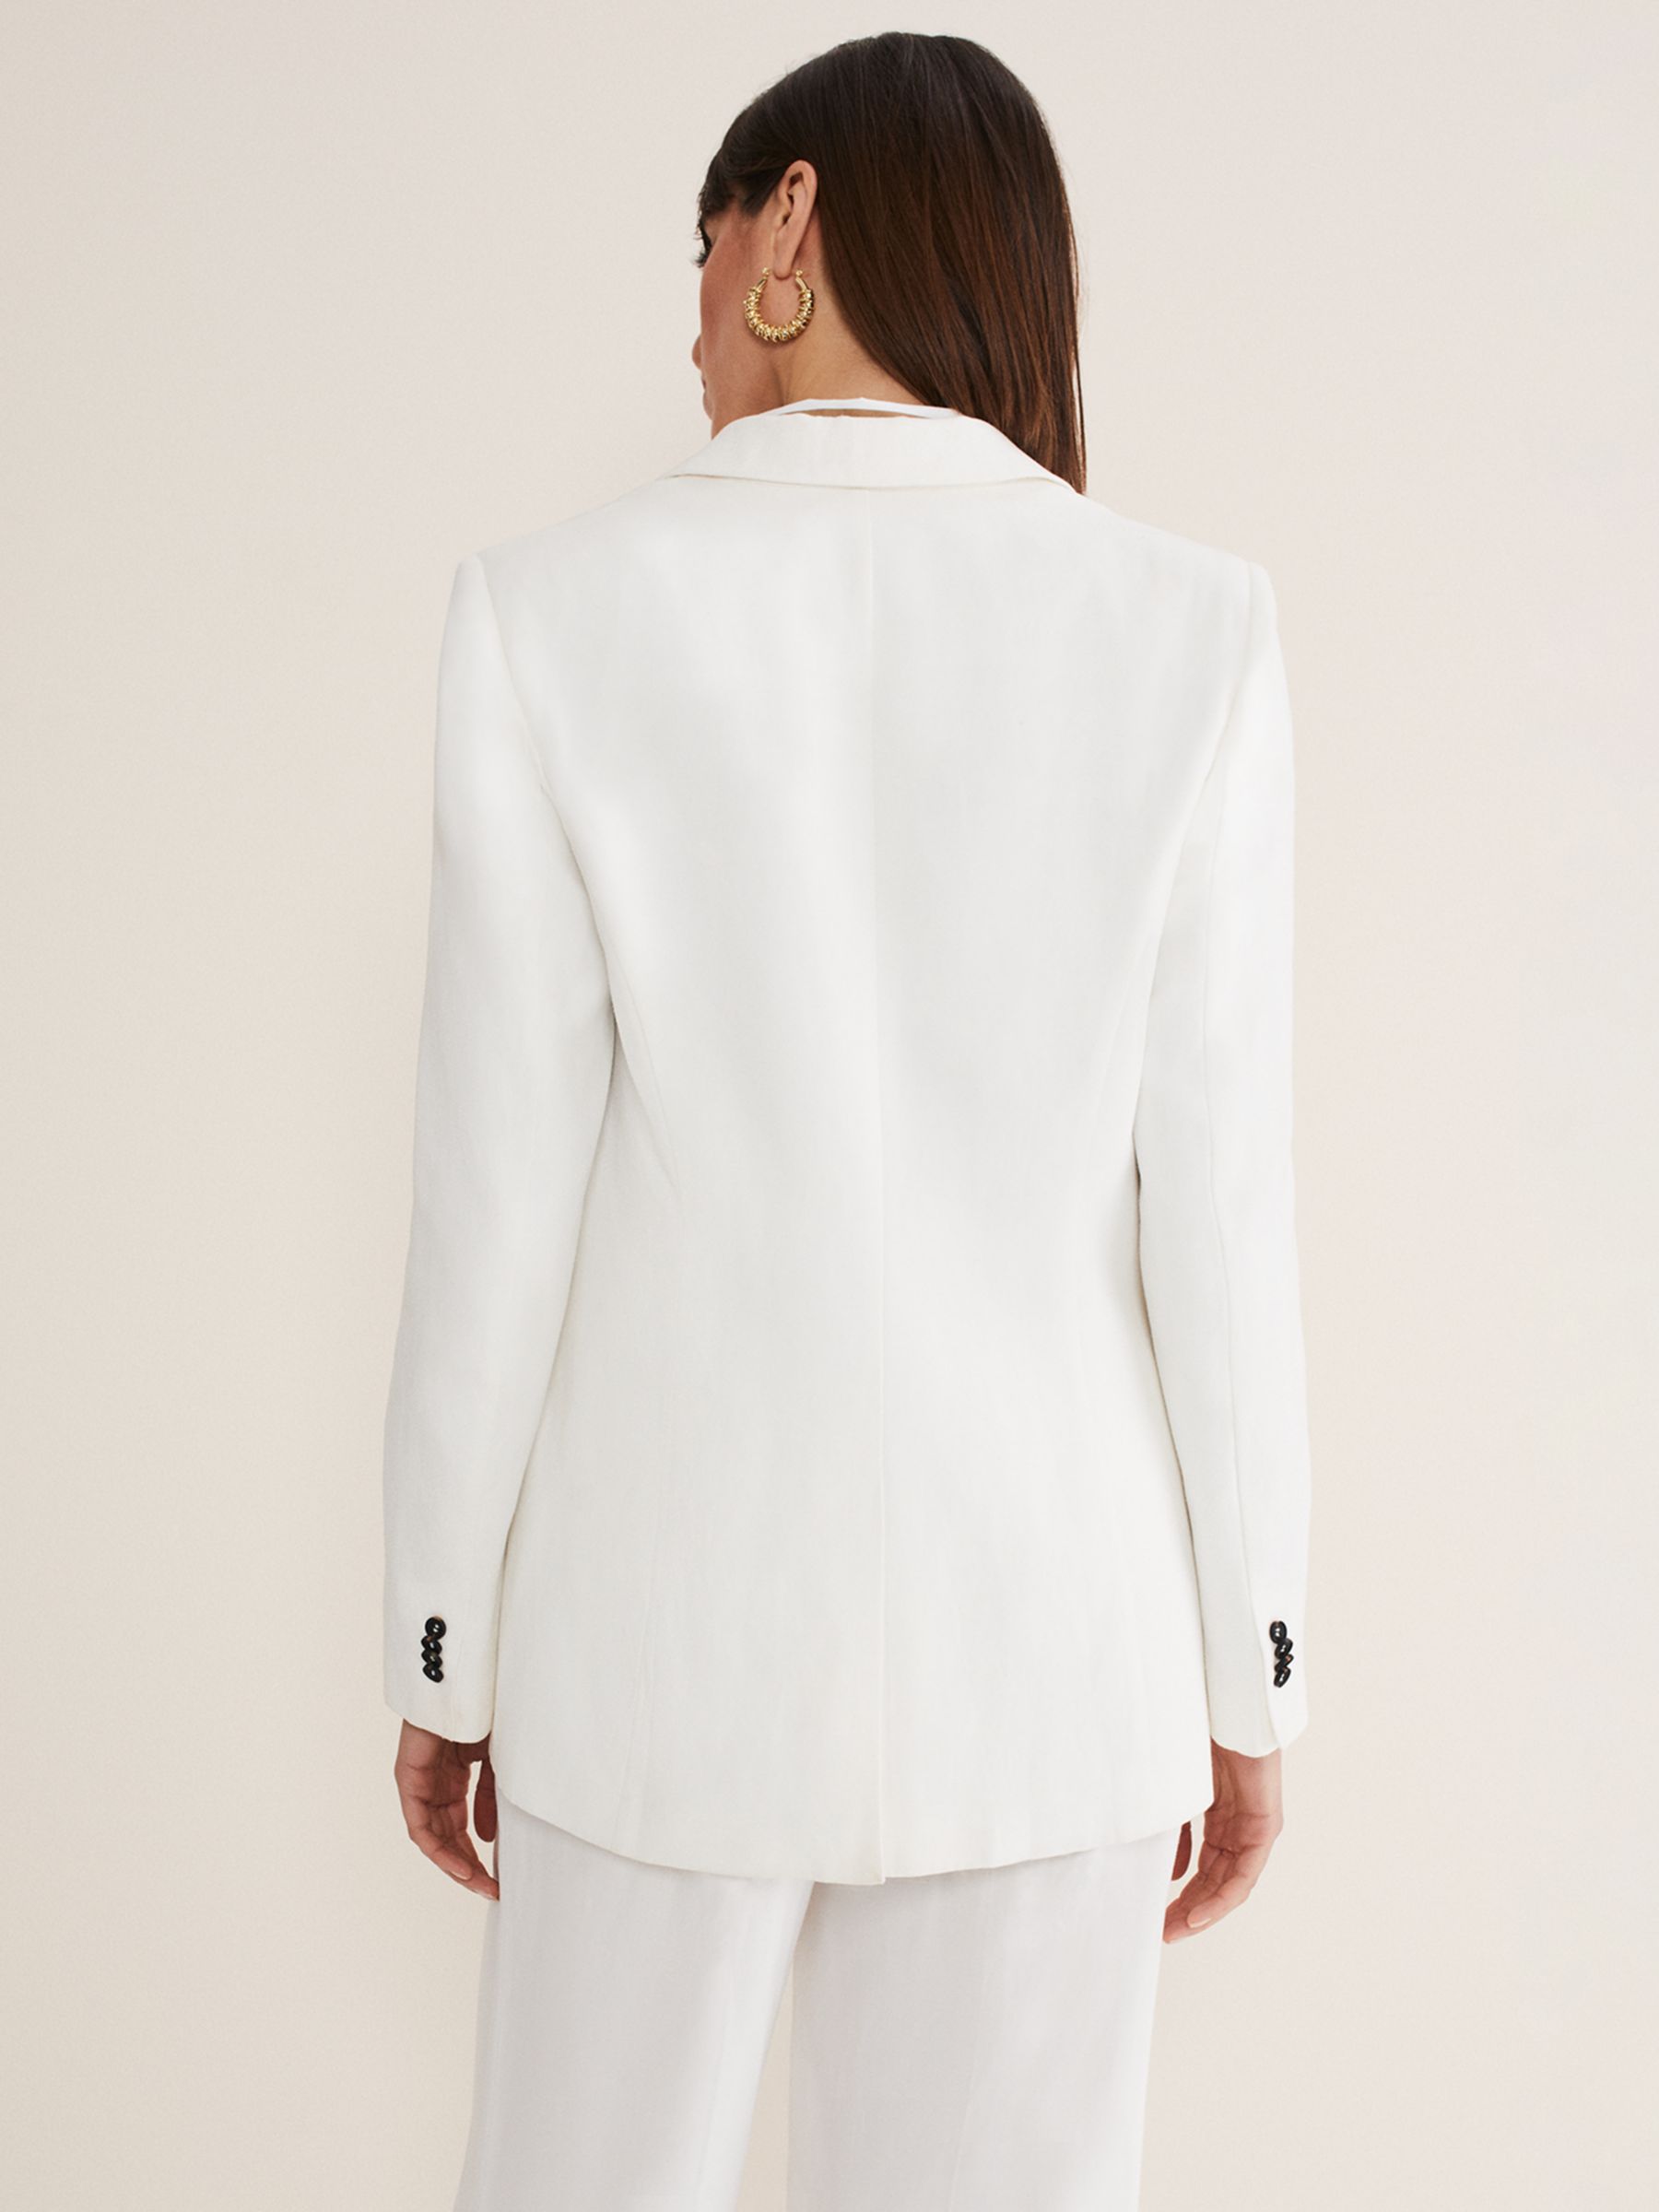 Bianca Suit Blazer Dress in Ivory Long Sleeve, Double Breasted